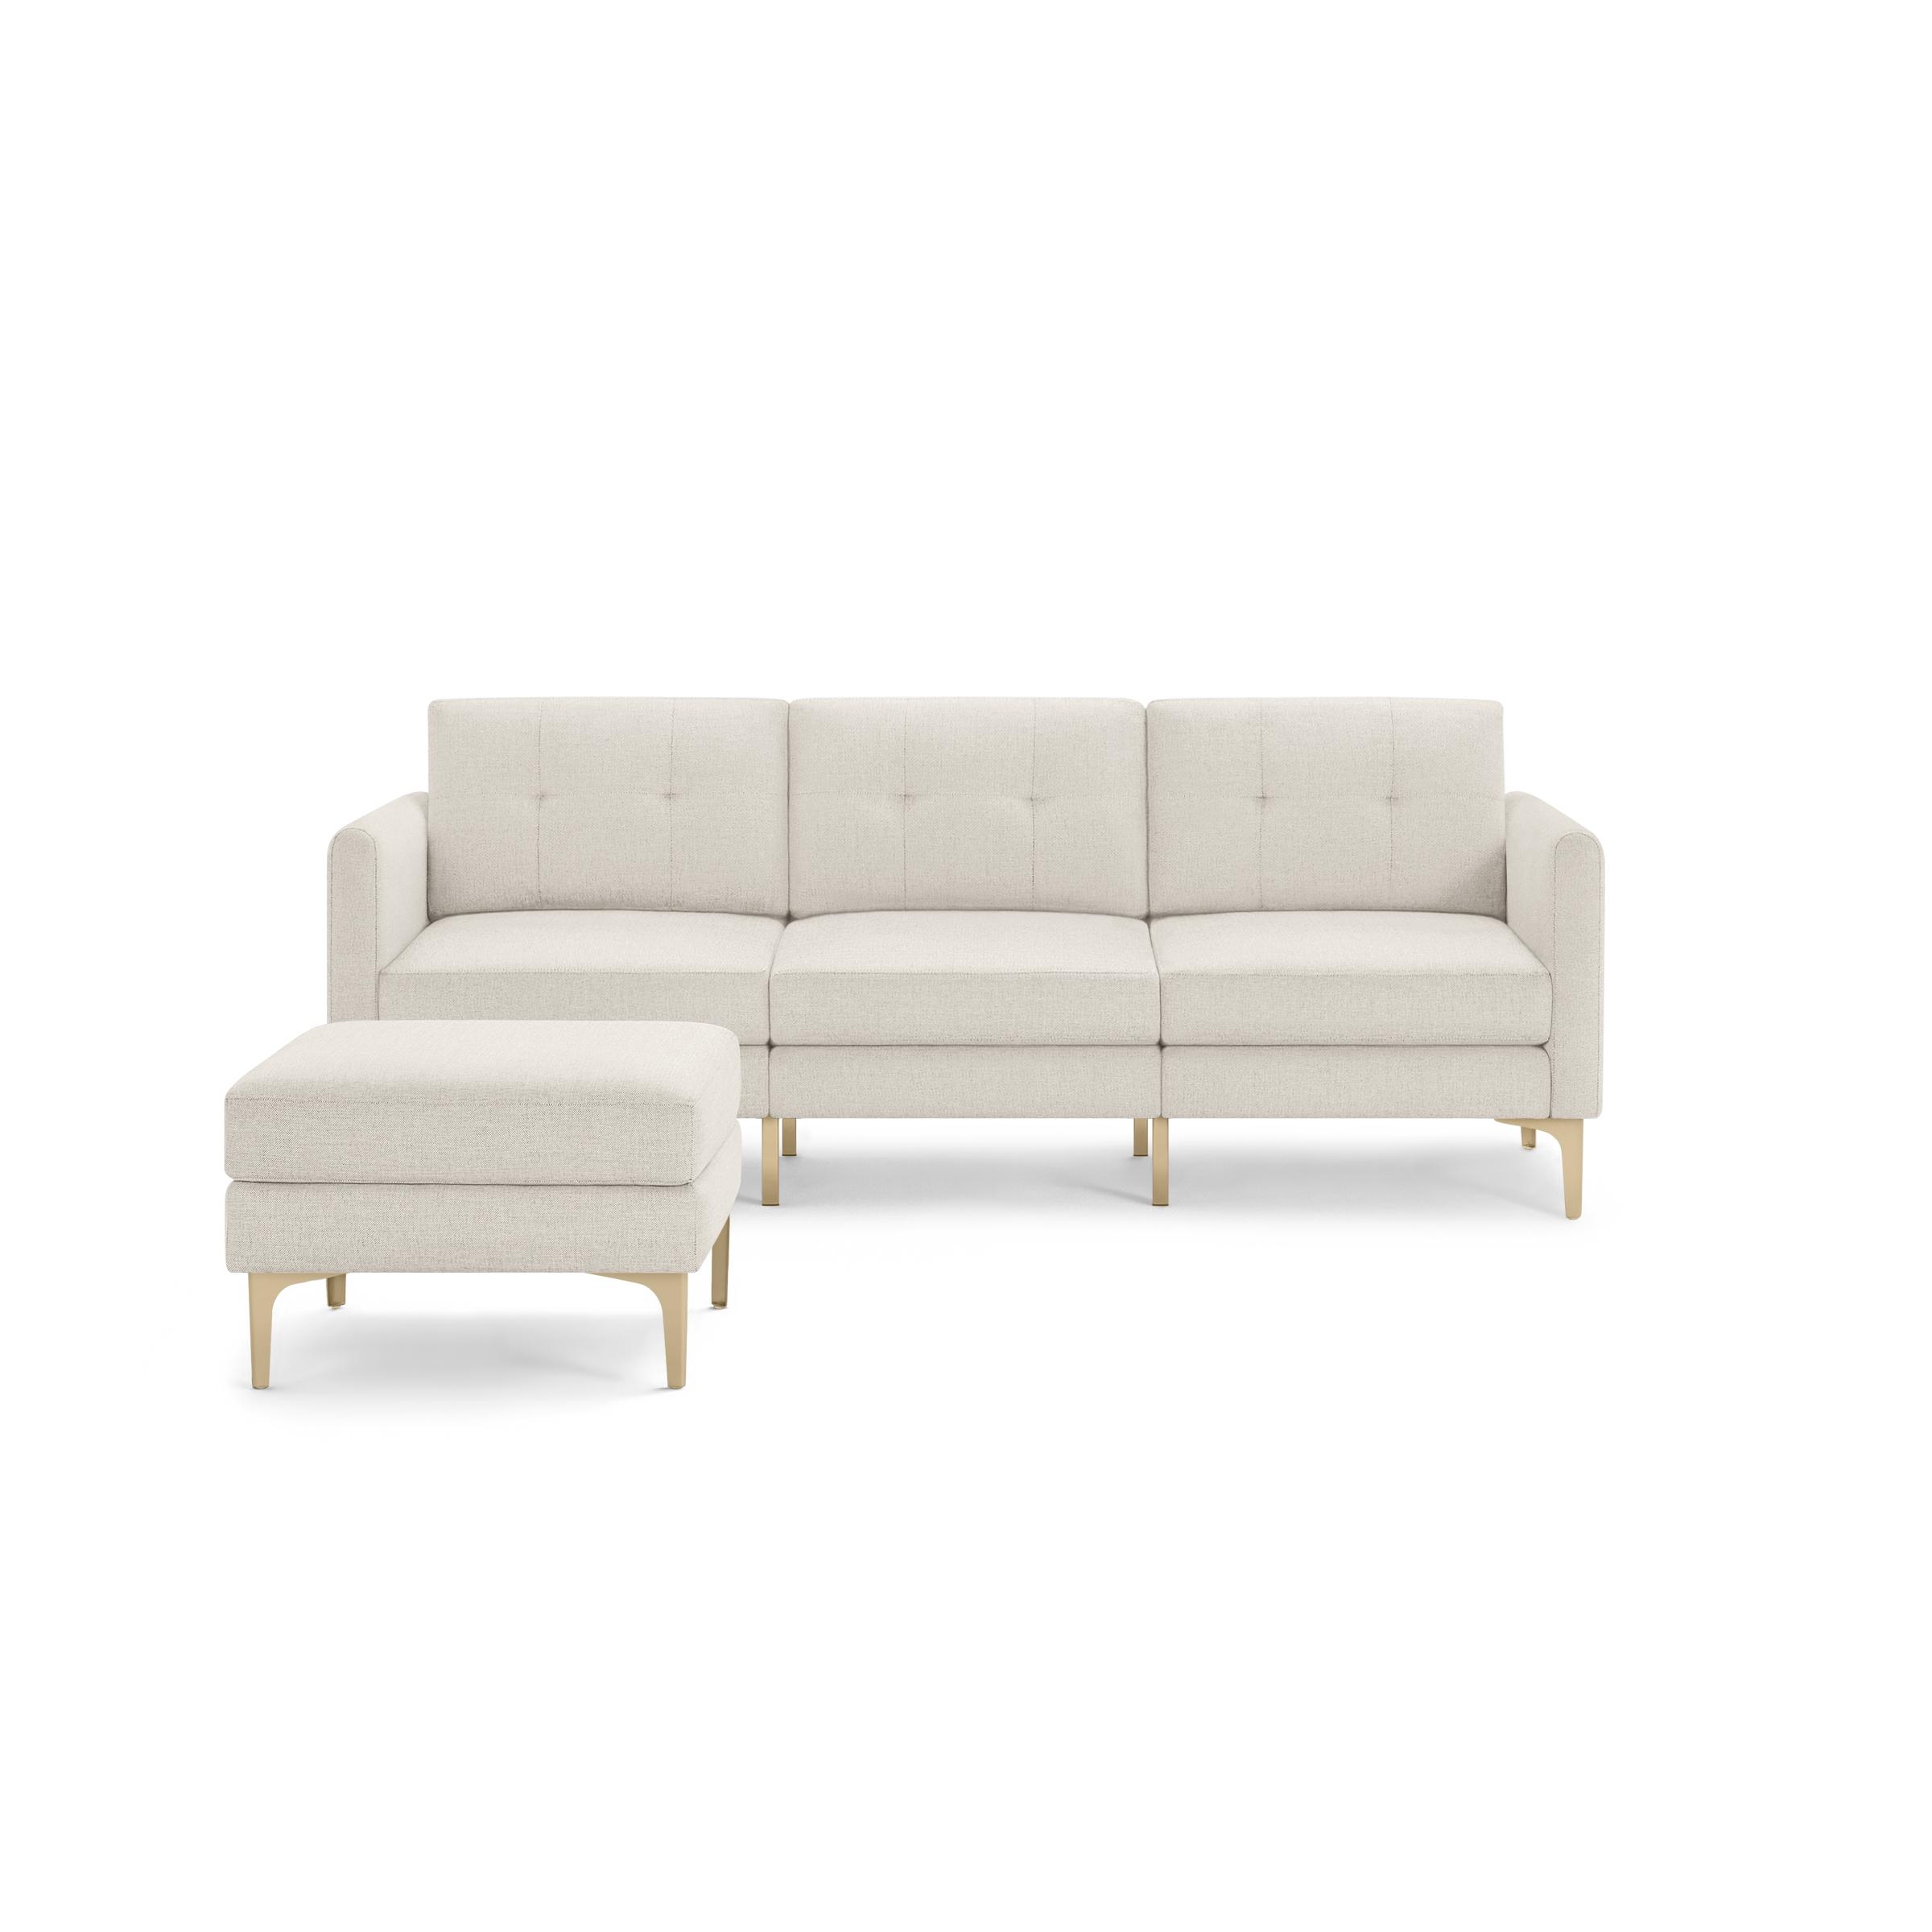 Nomad Sofa and Ottoman in Ivory, Brass Legs - Image 0